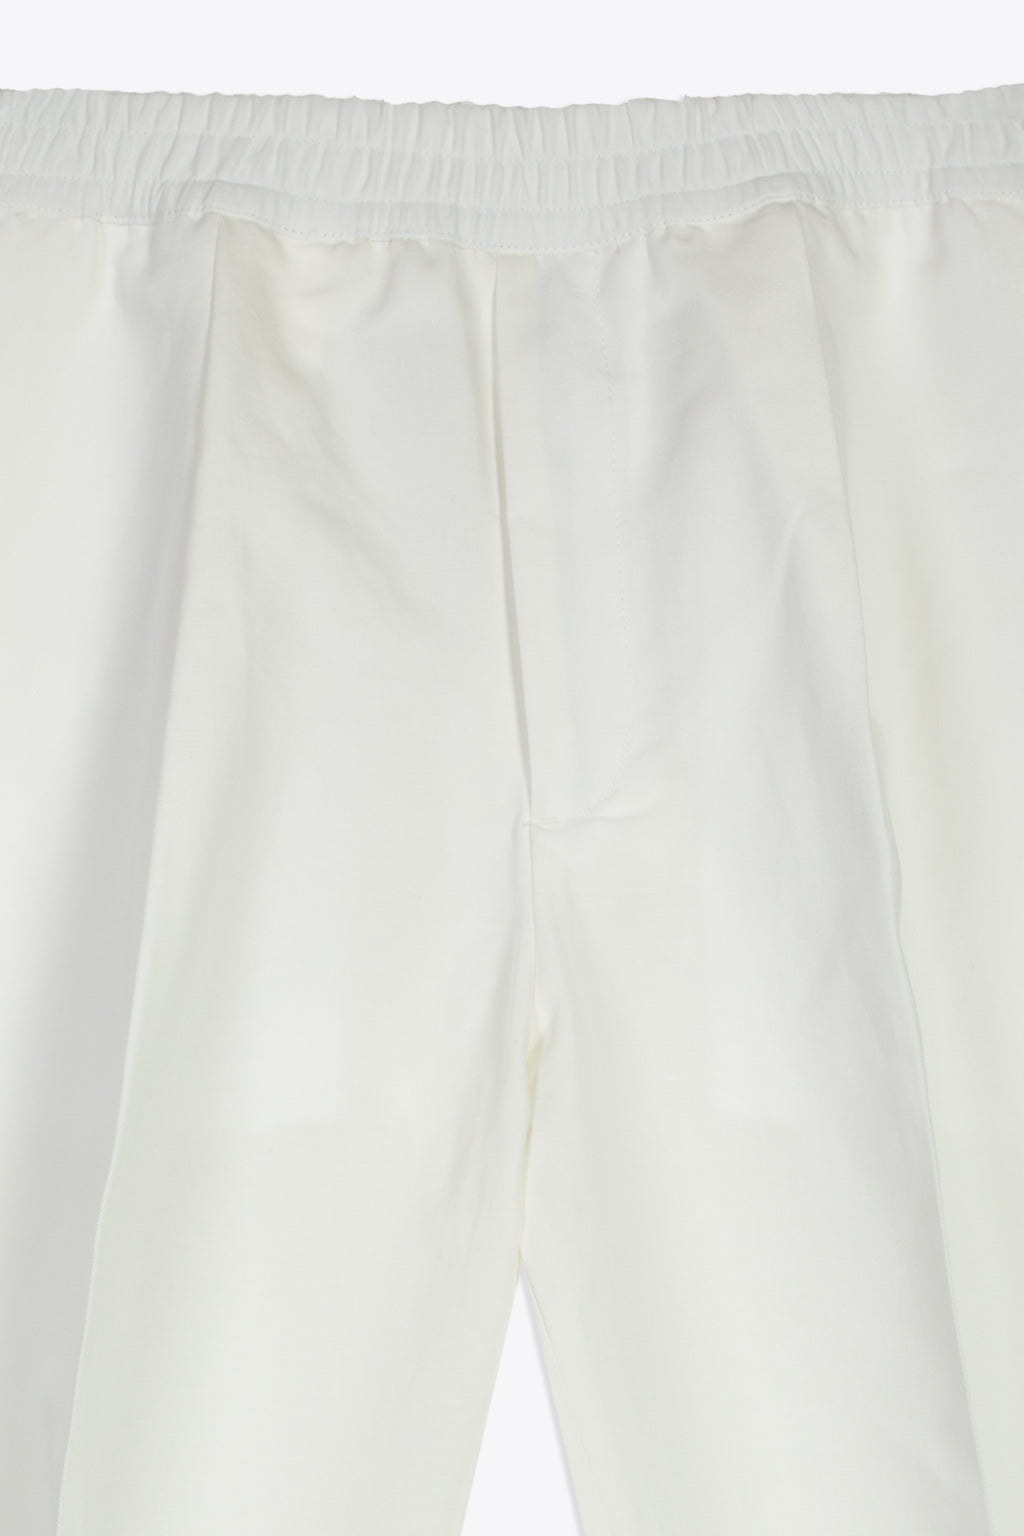 alt-image__Off-white-linen-blend-tailored-pant-with-elastic-waistband---Savoys